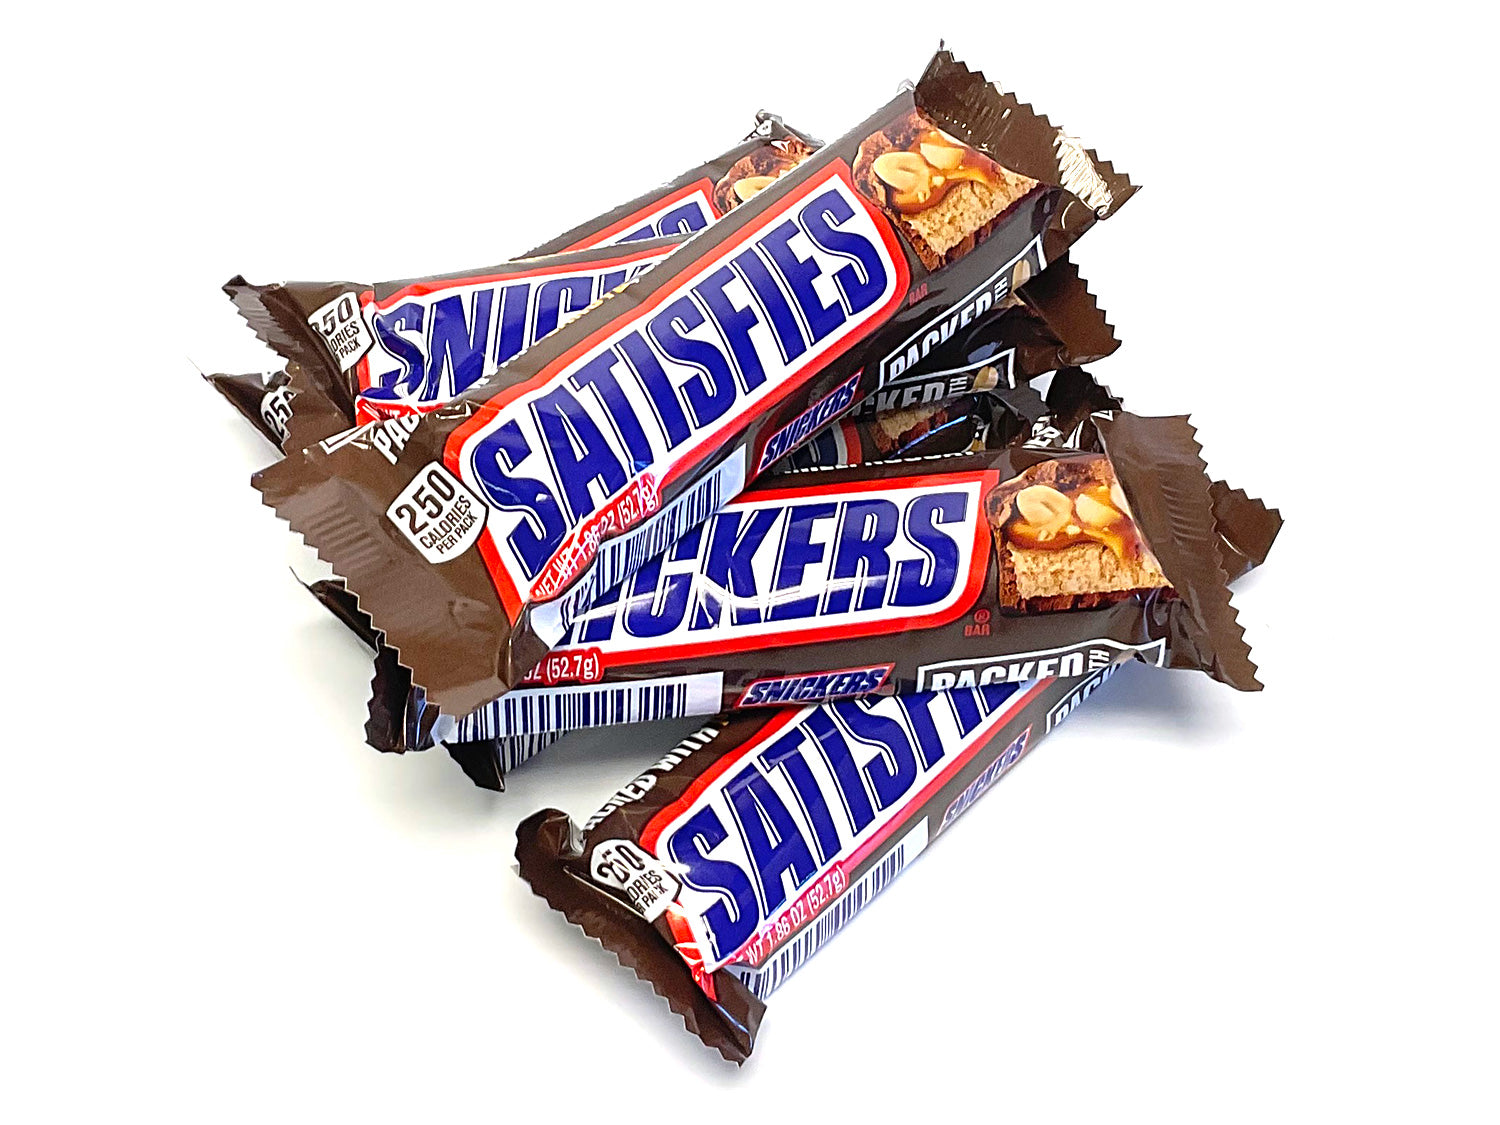 Snickers Full Size Chocolate Candy Bar - 1.86 oz Bar 5 Pack - Fresh Free  Ship